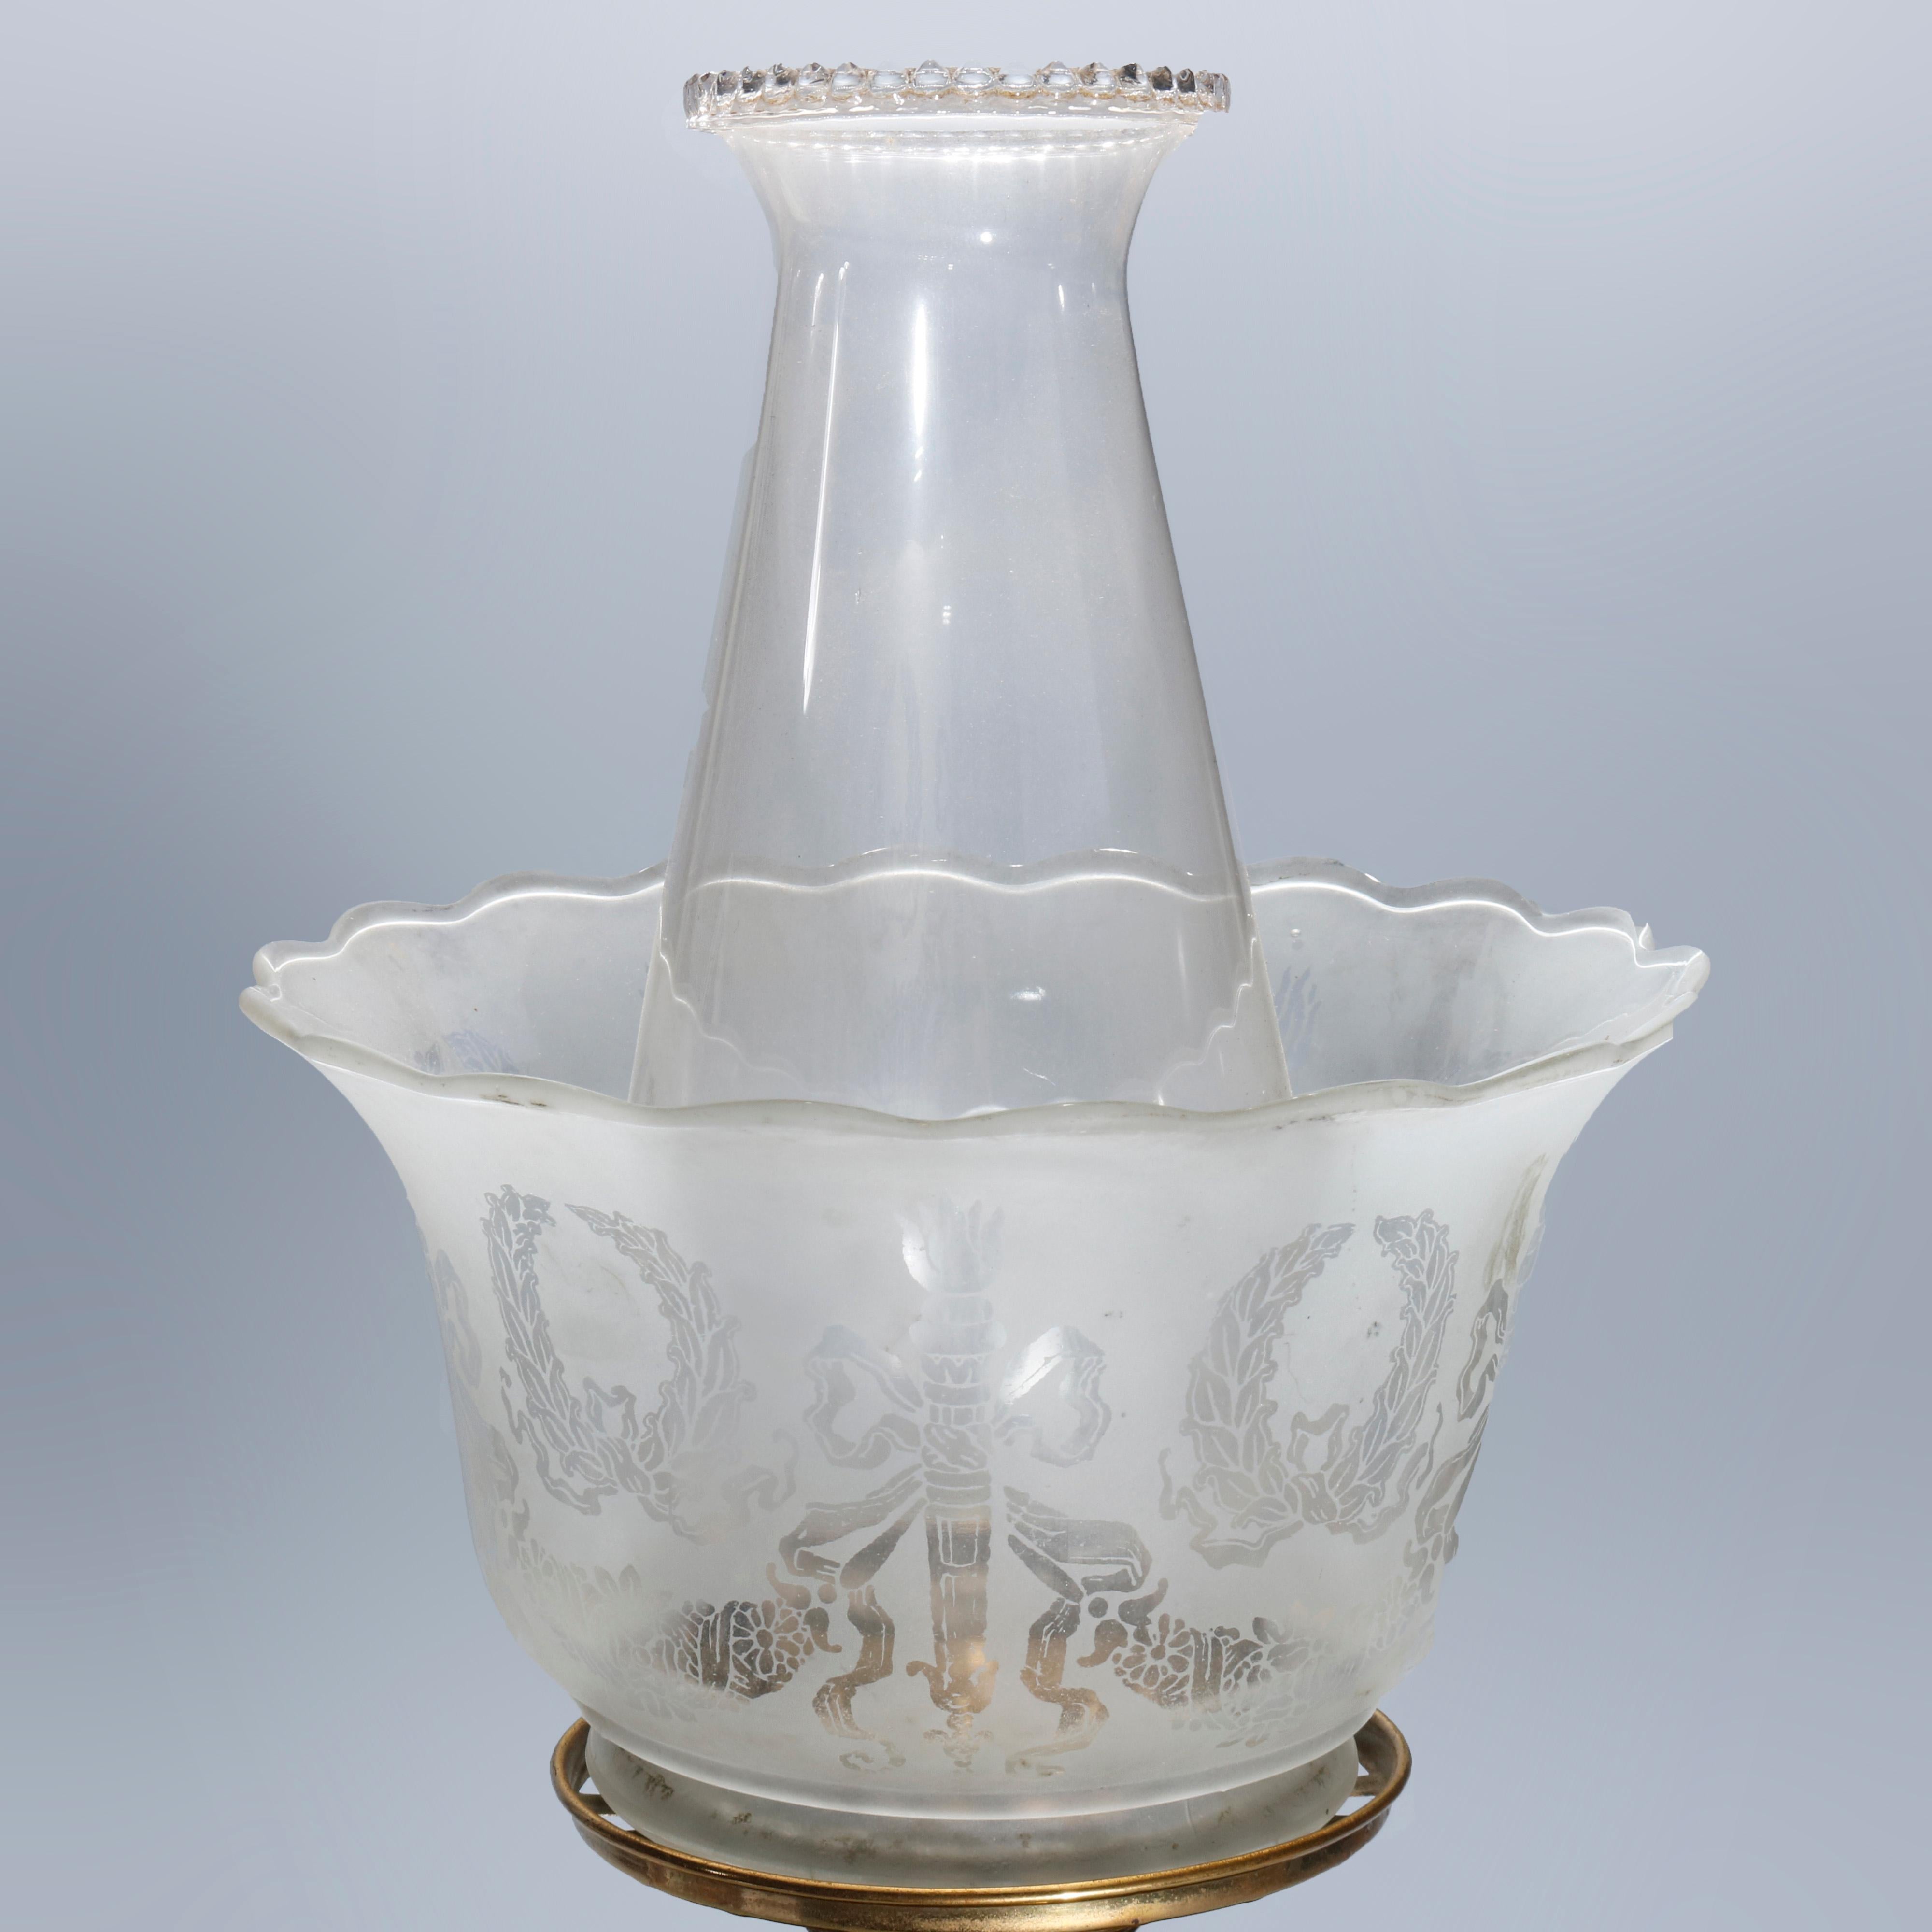 An antique Victorian Astral Solar Lamp offers etched glass ruffled rim shade surmounting brass font and seated on marble base, circa 1880.

Measures: 14.25